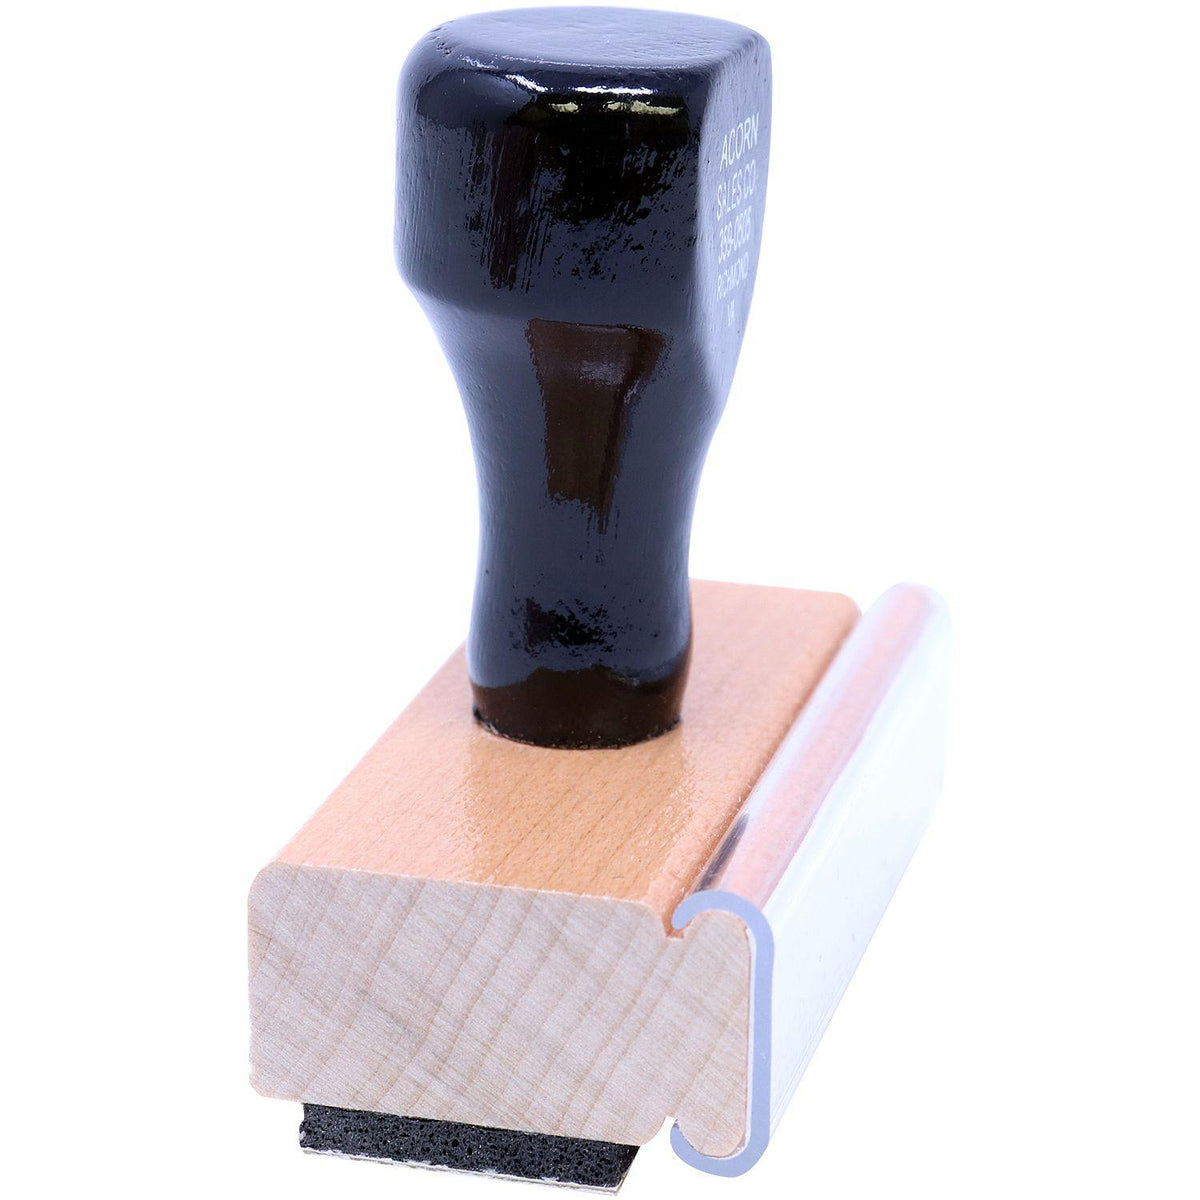 Side View of Large Cargado Rubber Stamp at an Angle